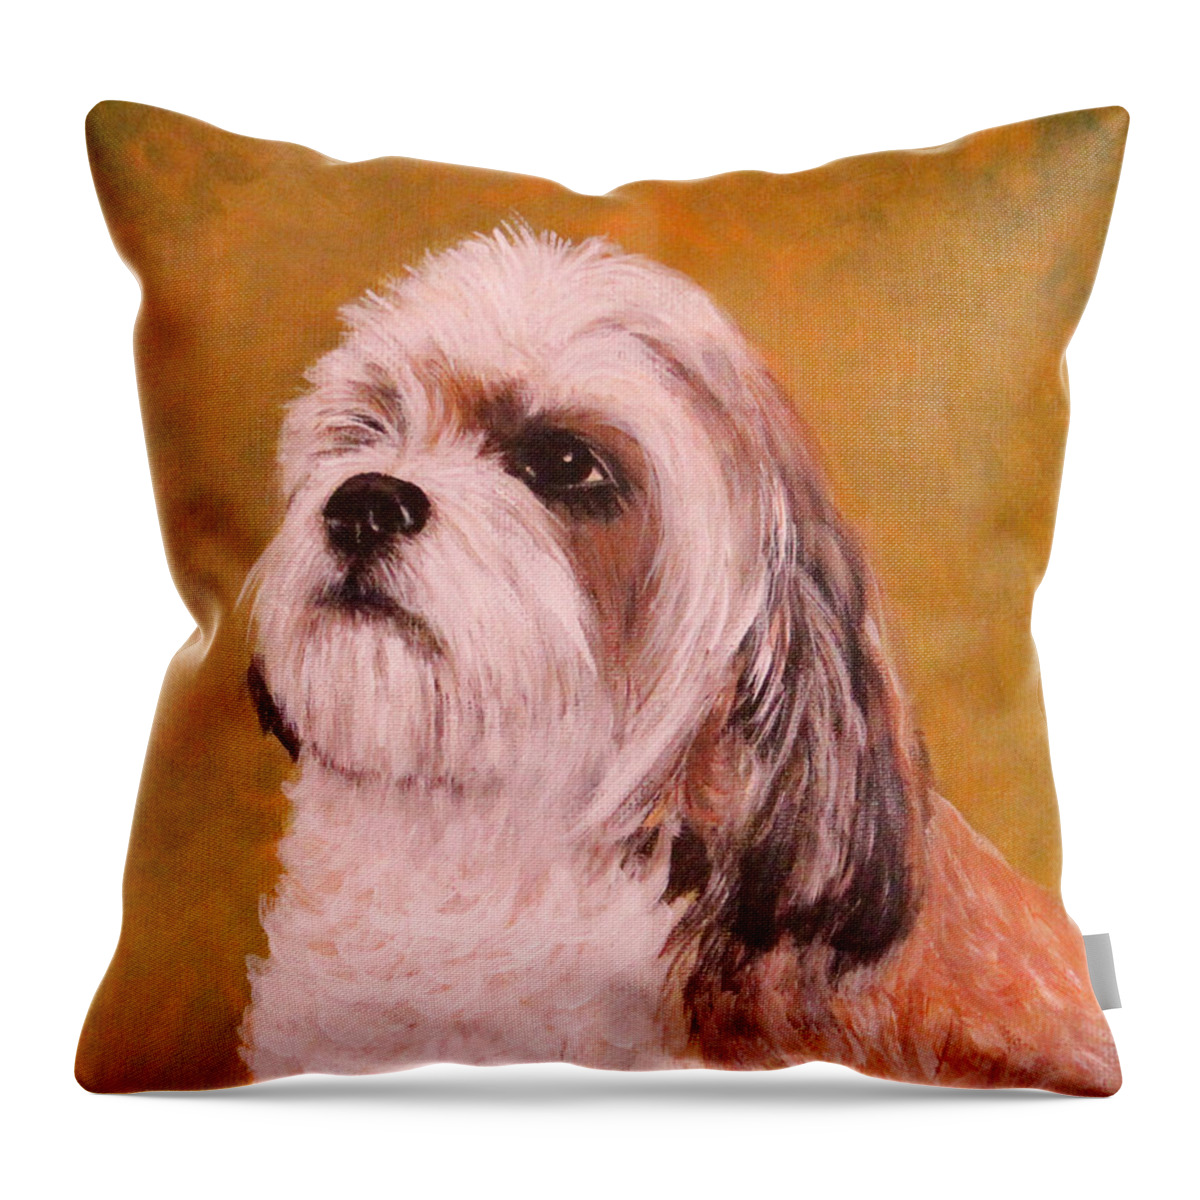 Pets Throw Pillow featuring the painting CoCo-puffs by Janet Greer Sammons